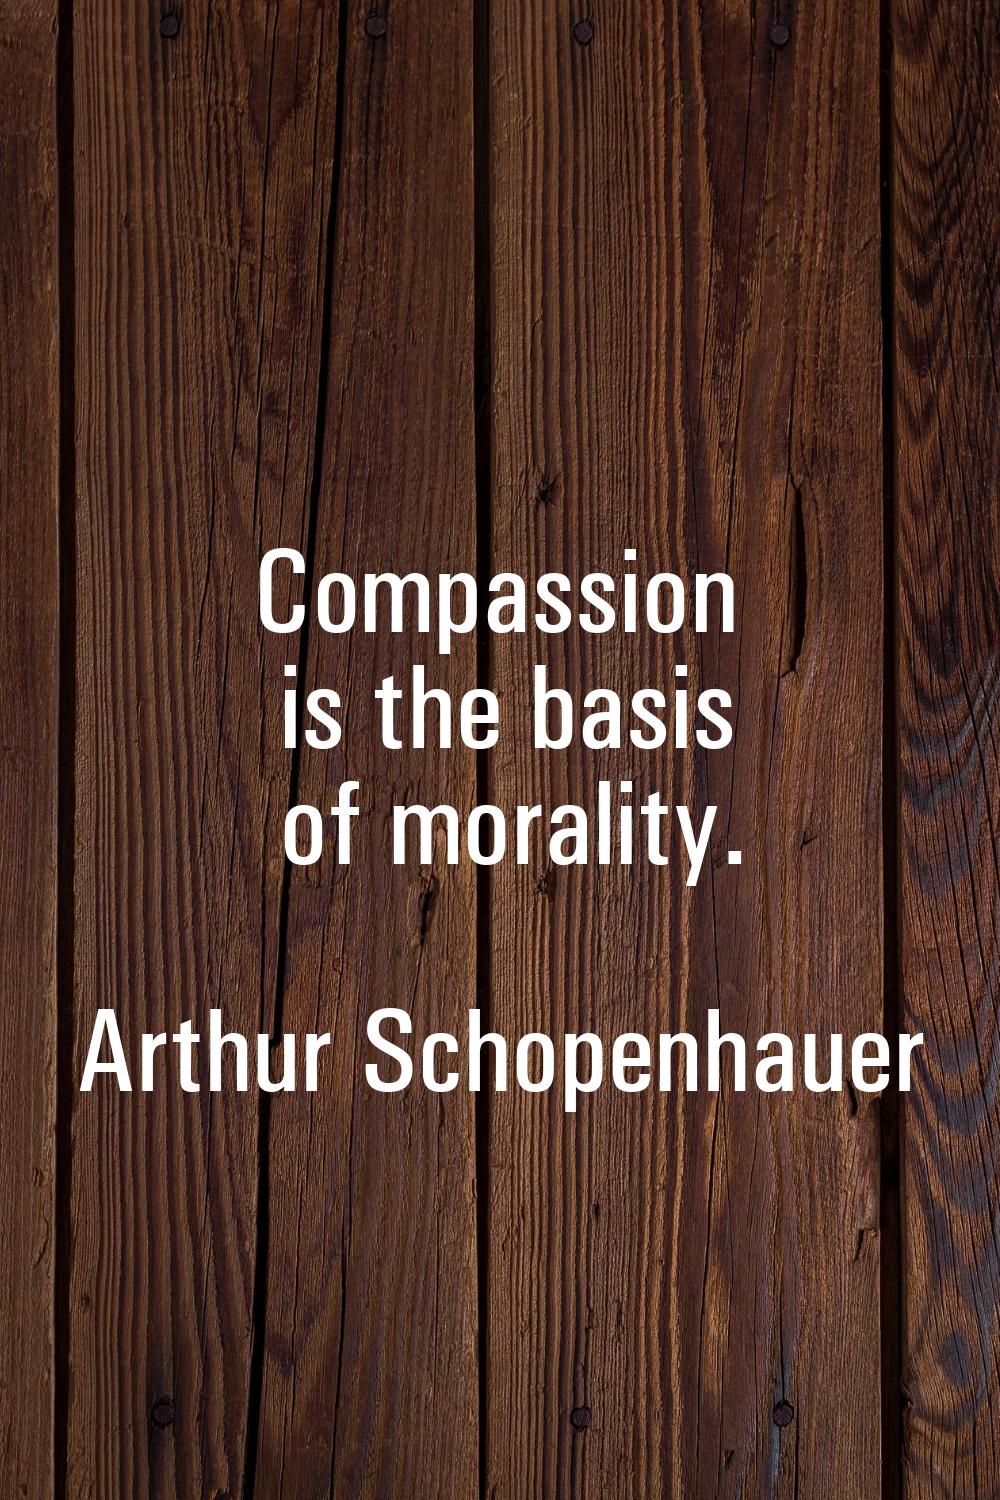 Compassion is the basis of morality.